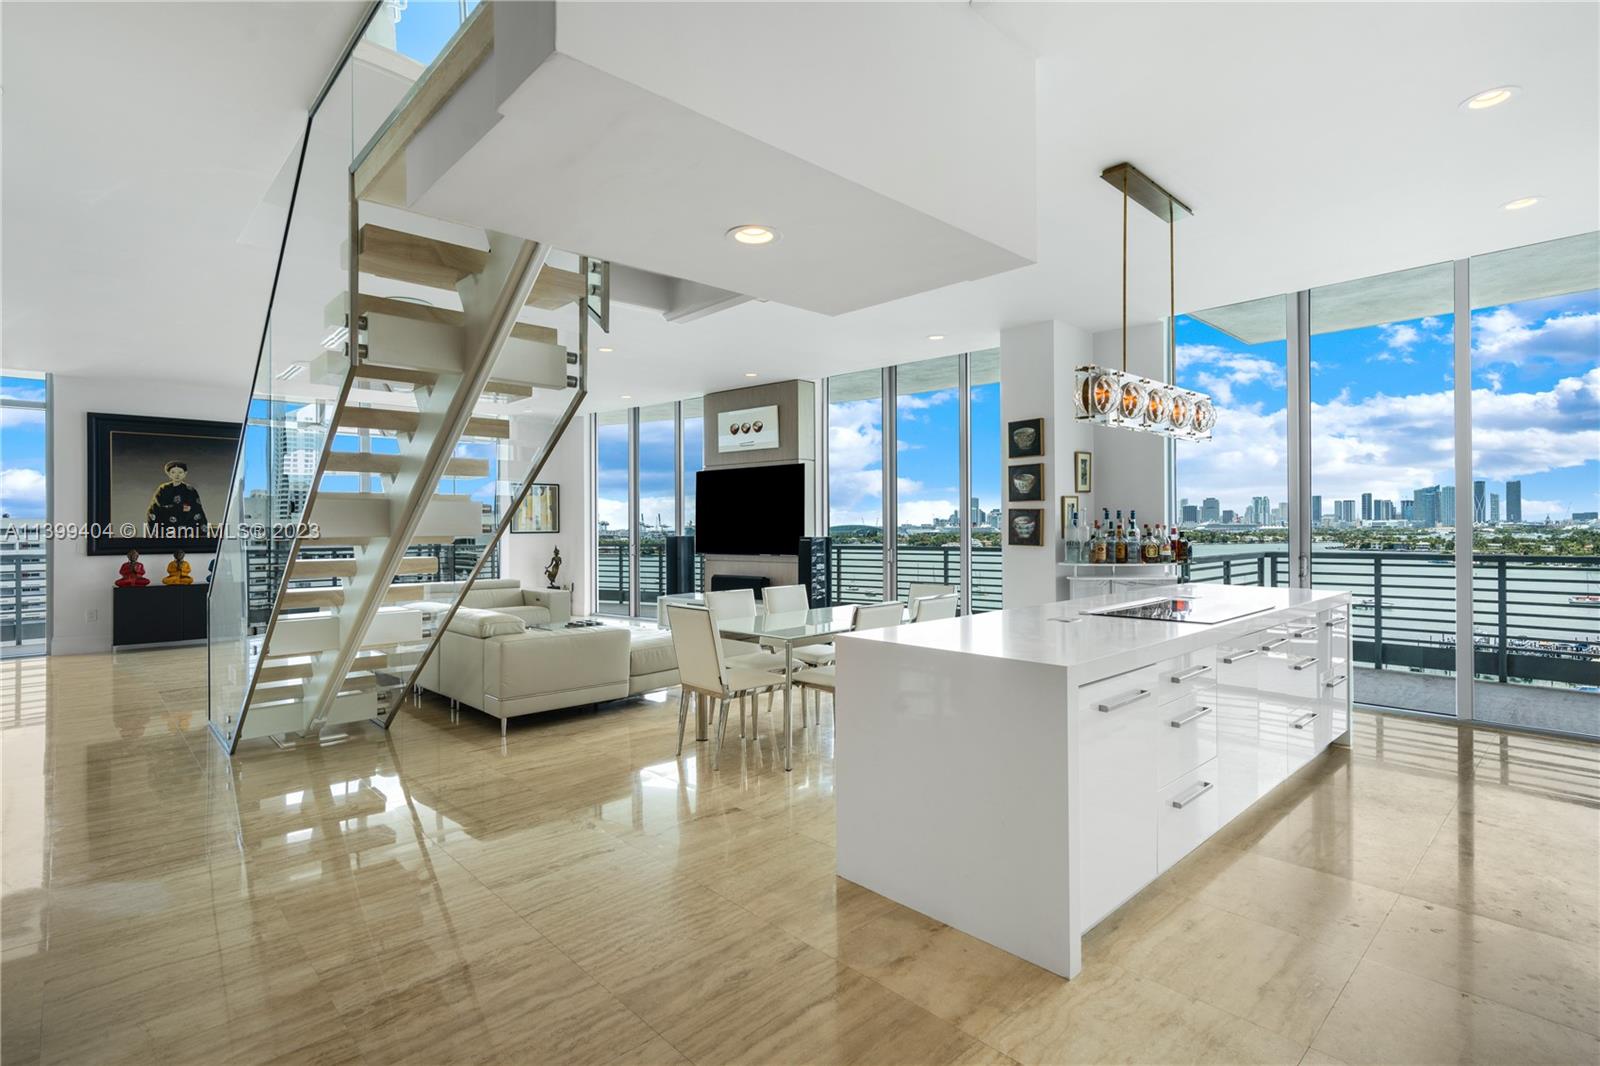 Welcome home to PH1 at Capri South Beach…

Embrace this rare opportunity to own a corner unit penthouse with sweeping views of the Miami Skyline. 

Boasting almost 3,000 interior SF, with an additional 3,000 SF of private outdoor space - split between various balconies and a private roof – this 3 bed, 3 full bath, with 2 half bath home is truly one of a kind.

This sun-flooded apartment enjoys light all hours of the day, courtesy of the countless floor to ceiling windows that line the home.

No expense spared in the upgrading of this apartment, including an impressive Savant Home Automation System, custom interior and exterior lighting, and much more!

Capri South Beach is a full-service condominium, offering doorman and valet services.

*some images have been virtually staged